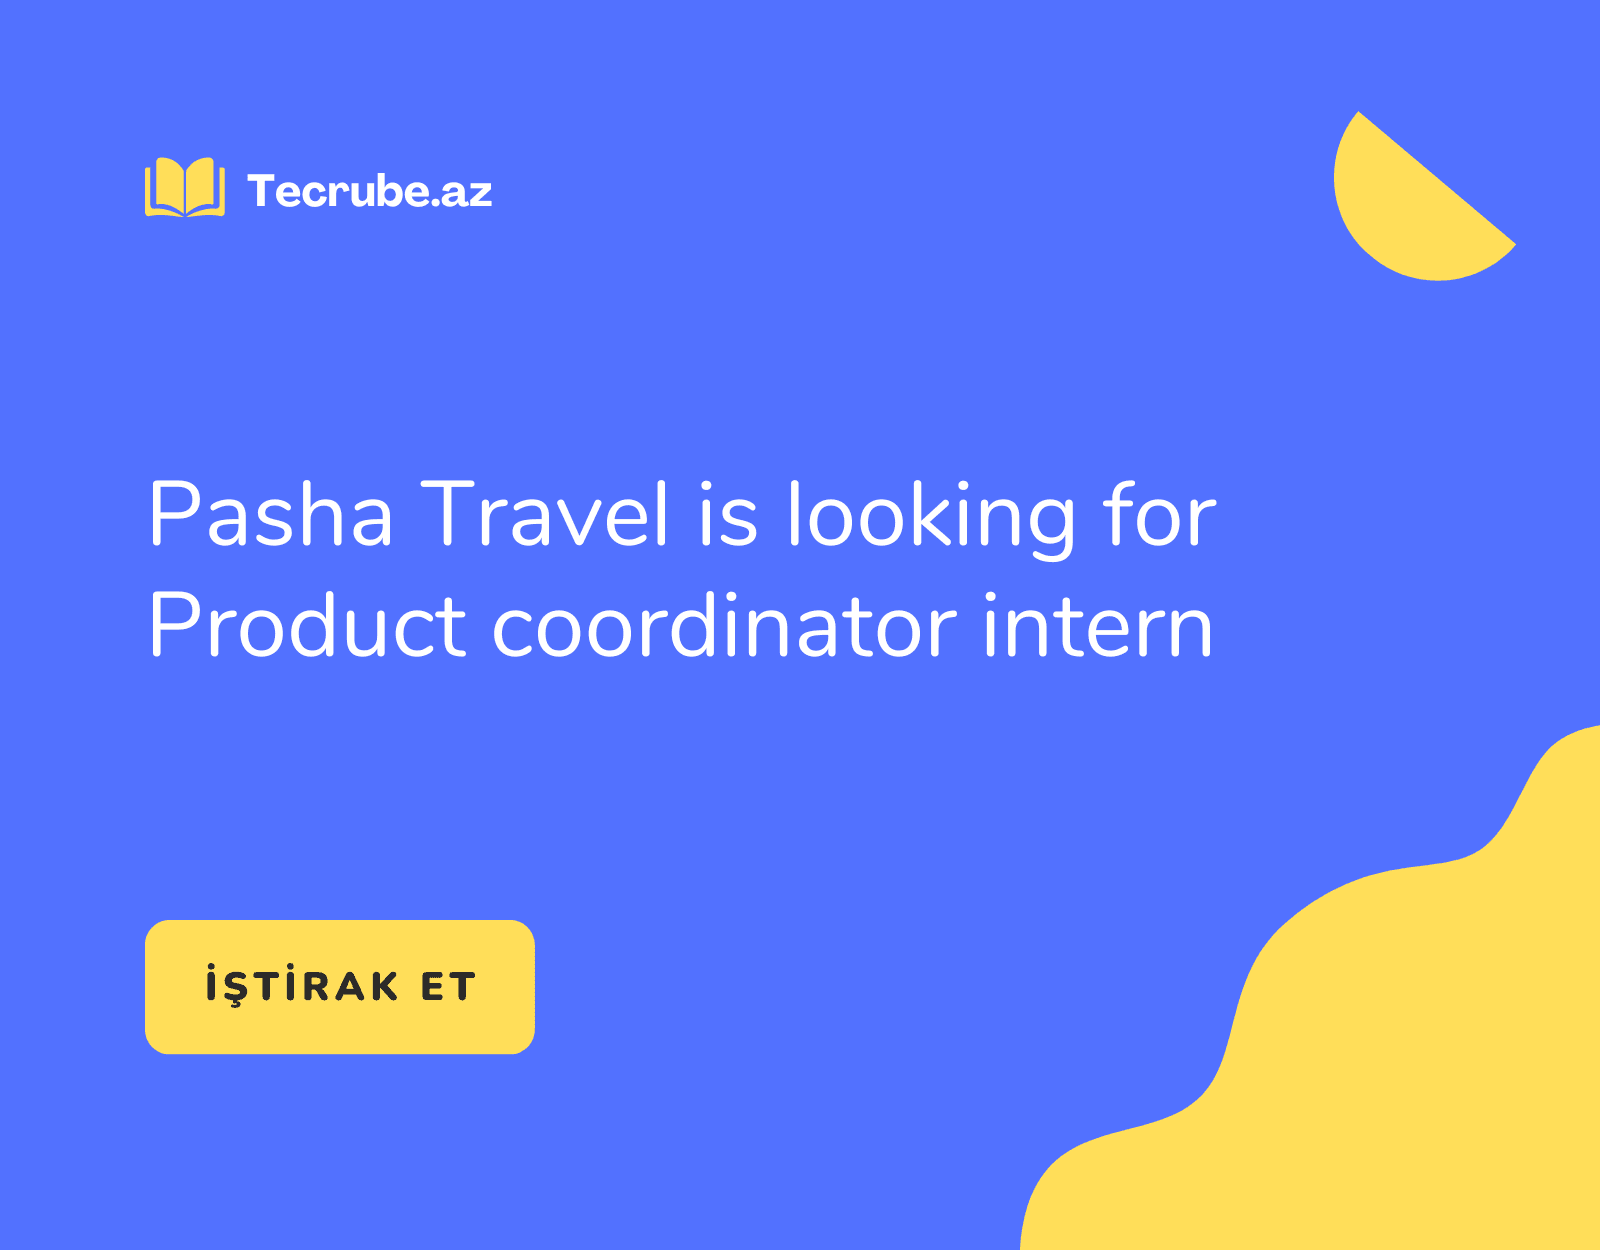 Pasha Travel is looking for Product coordinator intern